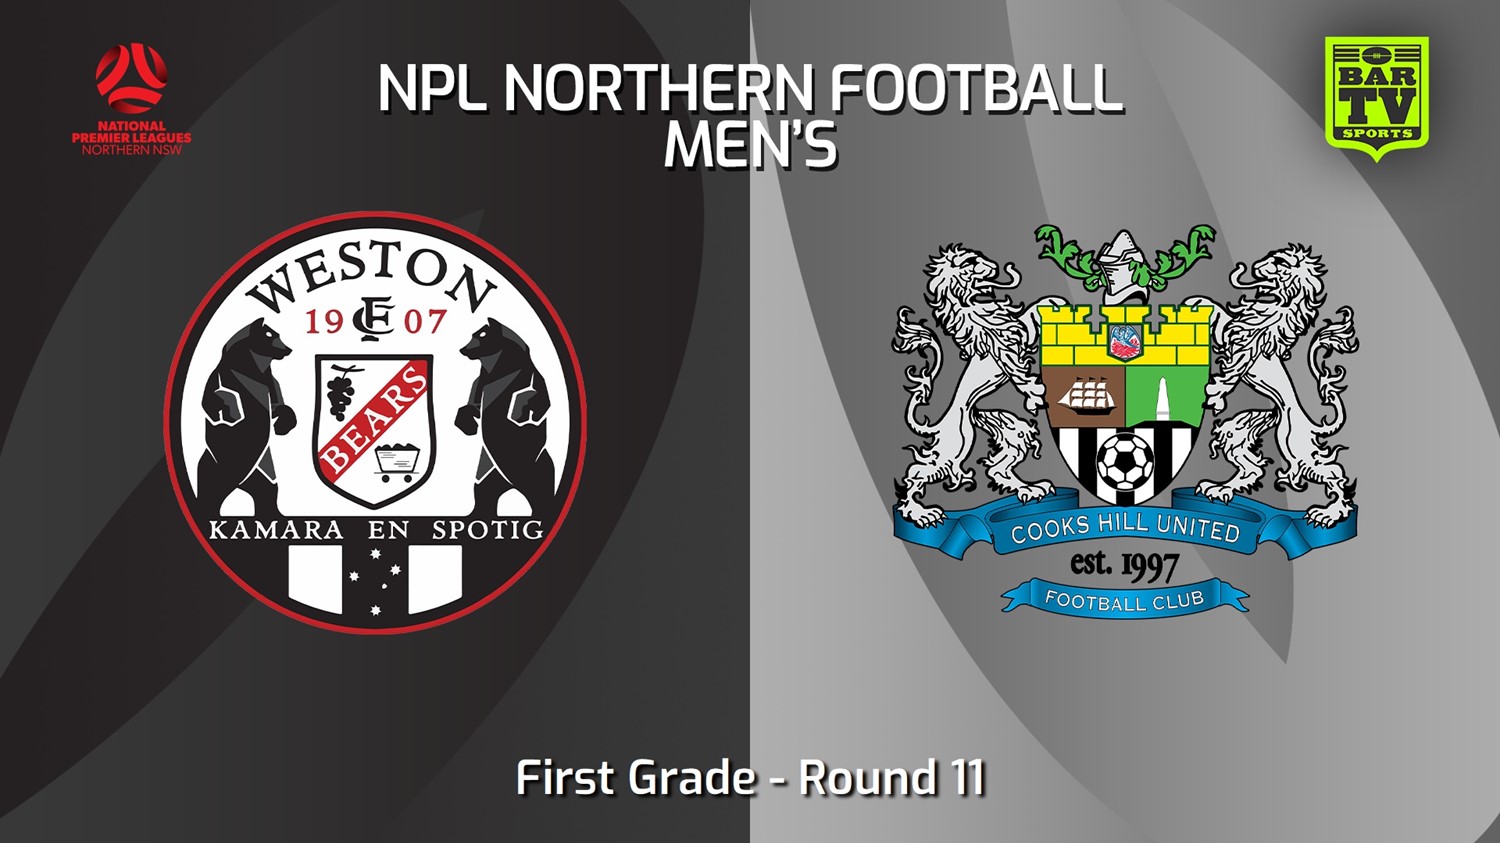 240512-video-NNSW NPLM Round 11 - Weston Workers FC v Cooks Hill United FC Minigame Slate Image